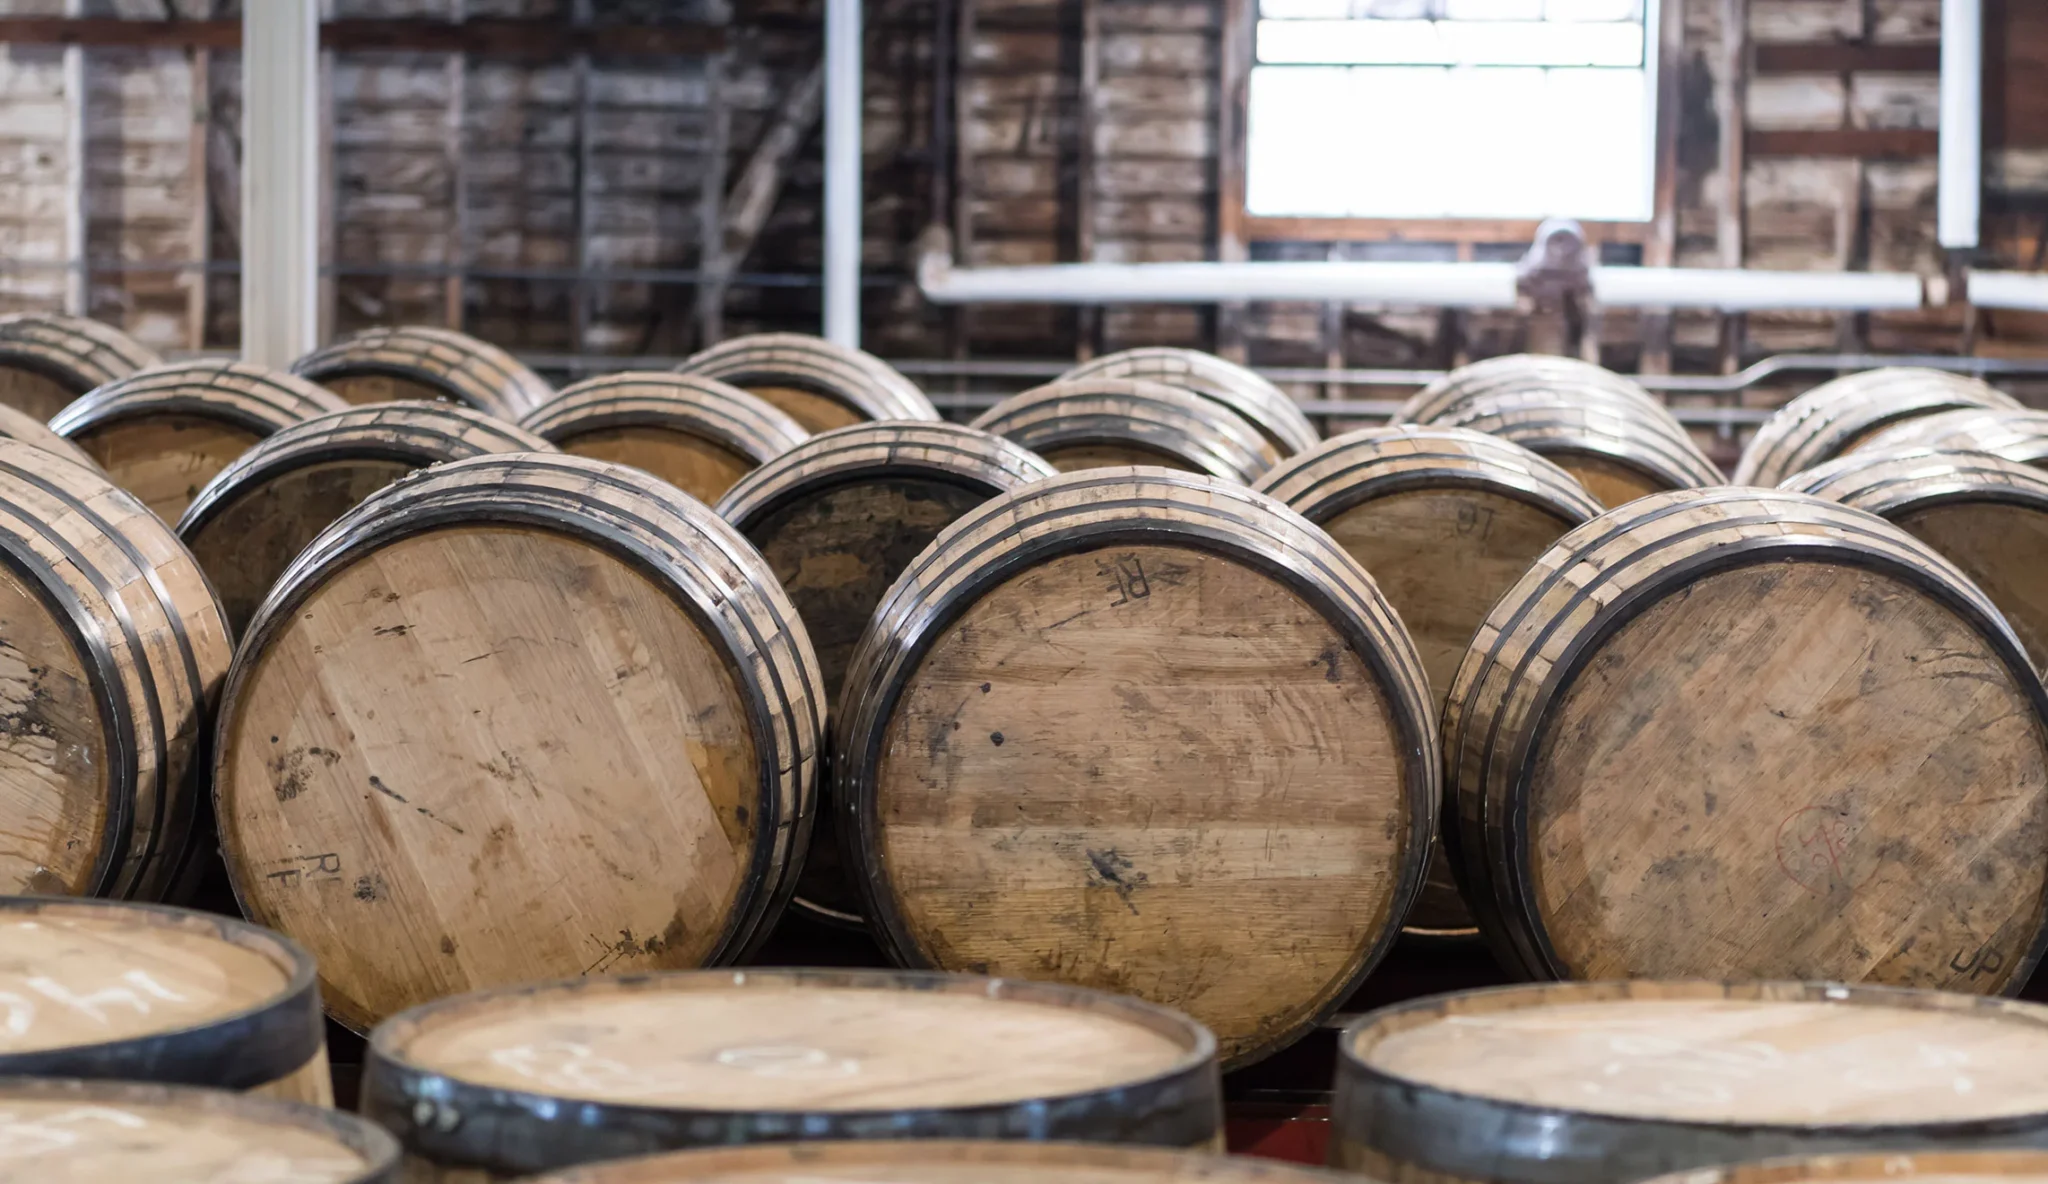 Taxation of wasting chattels: A focus on whisky casks